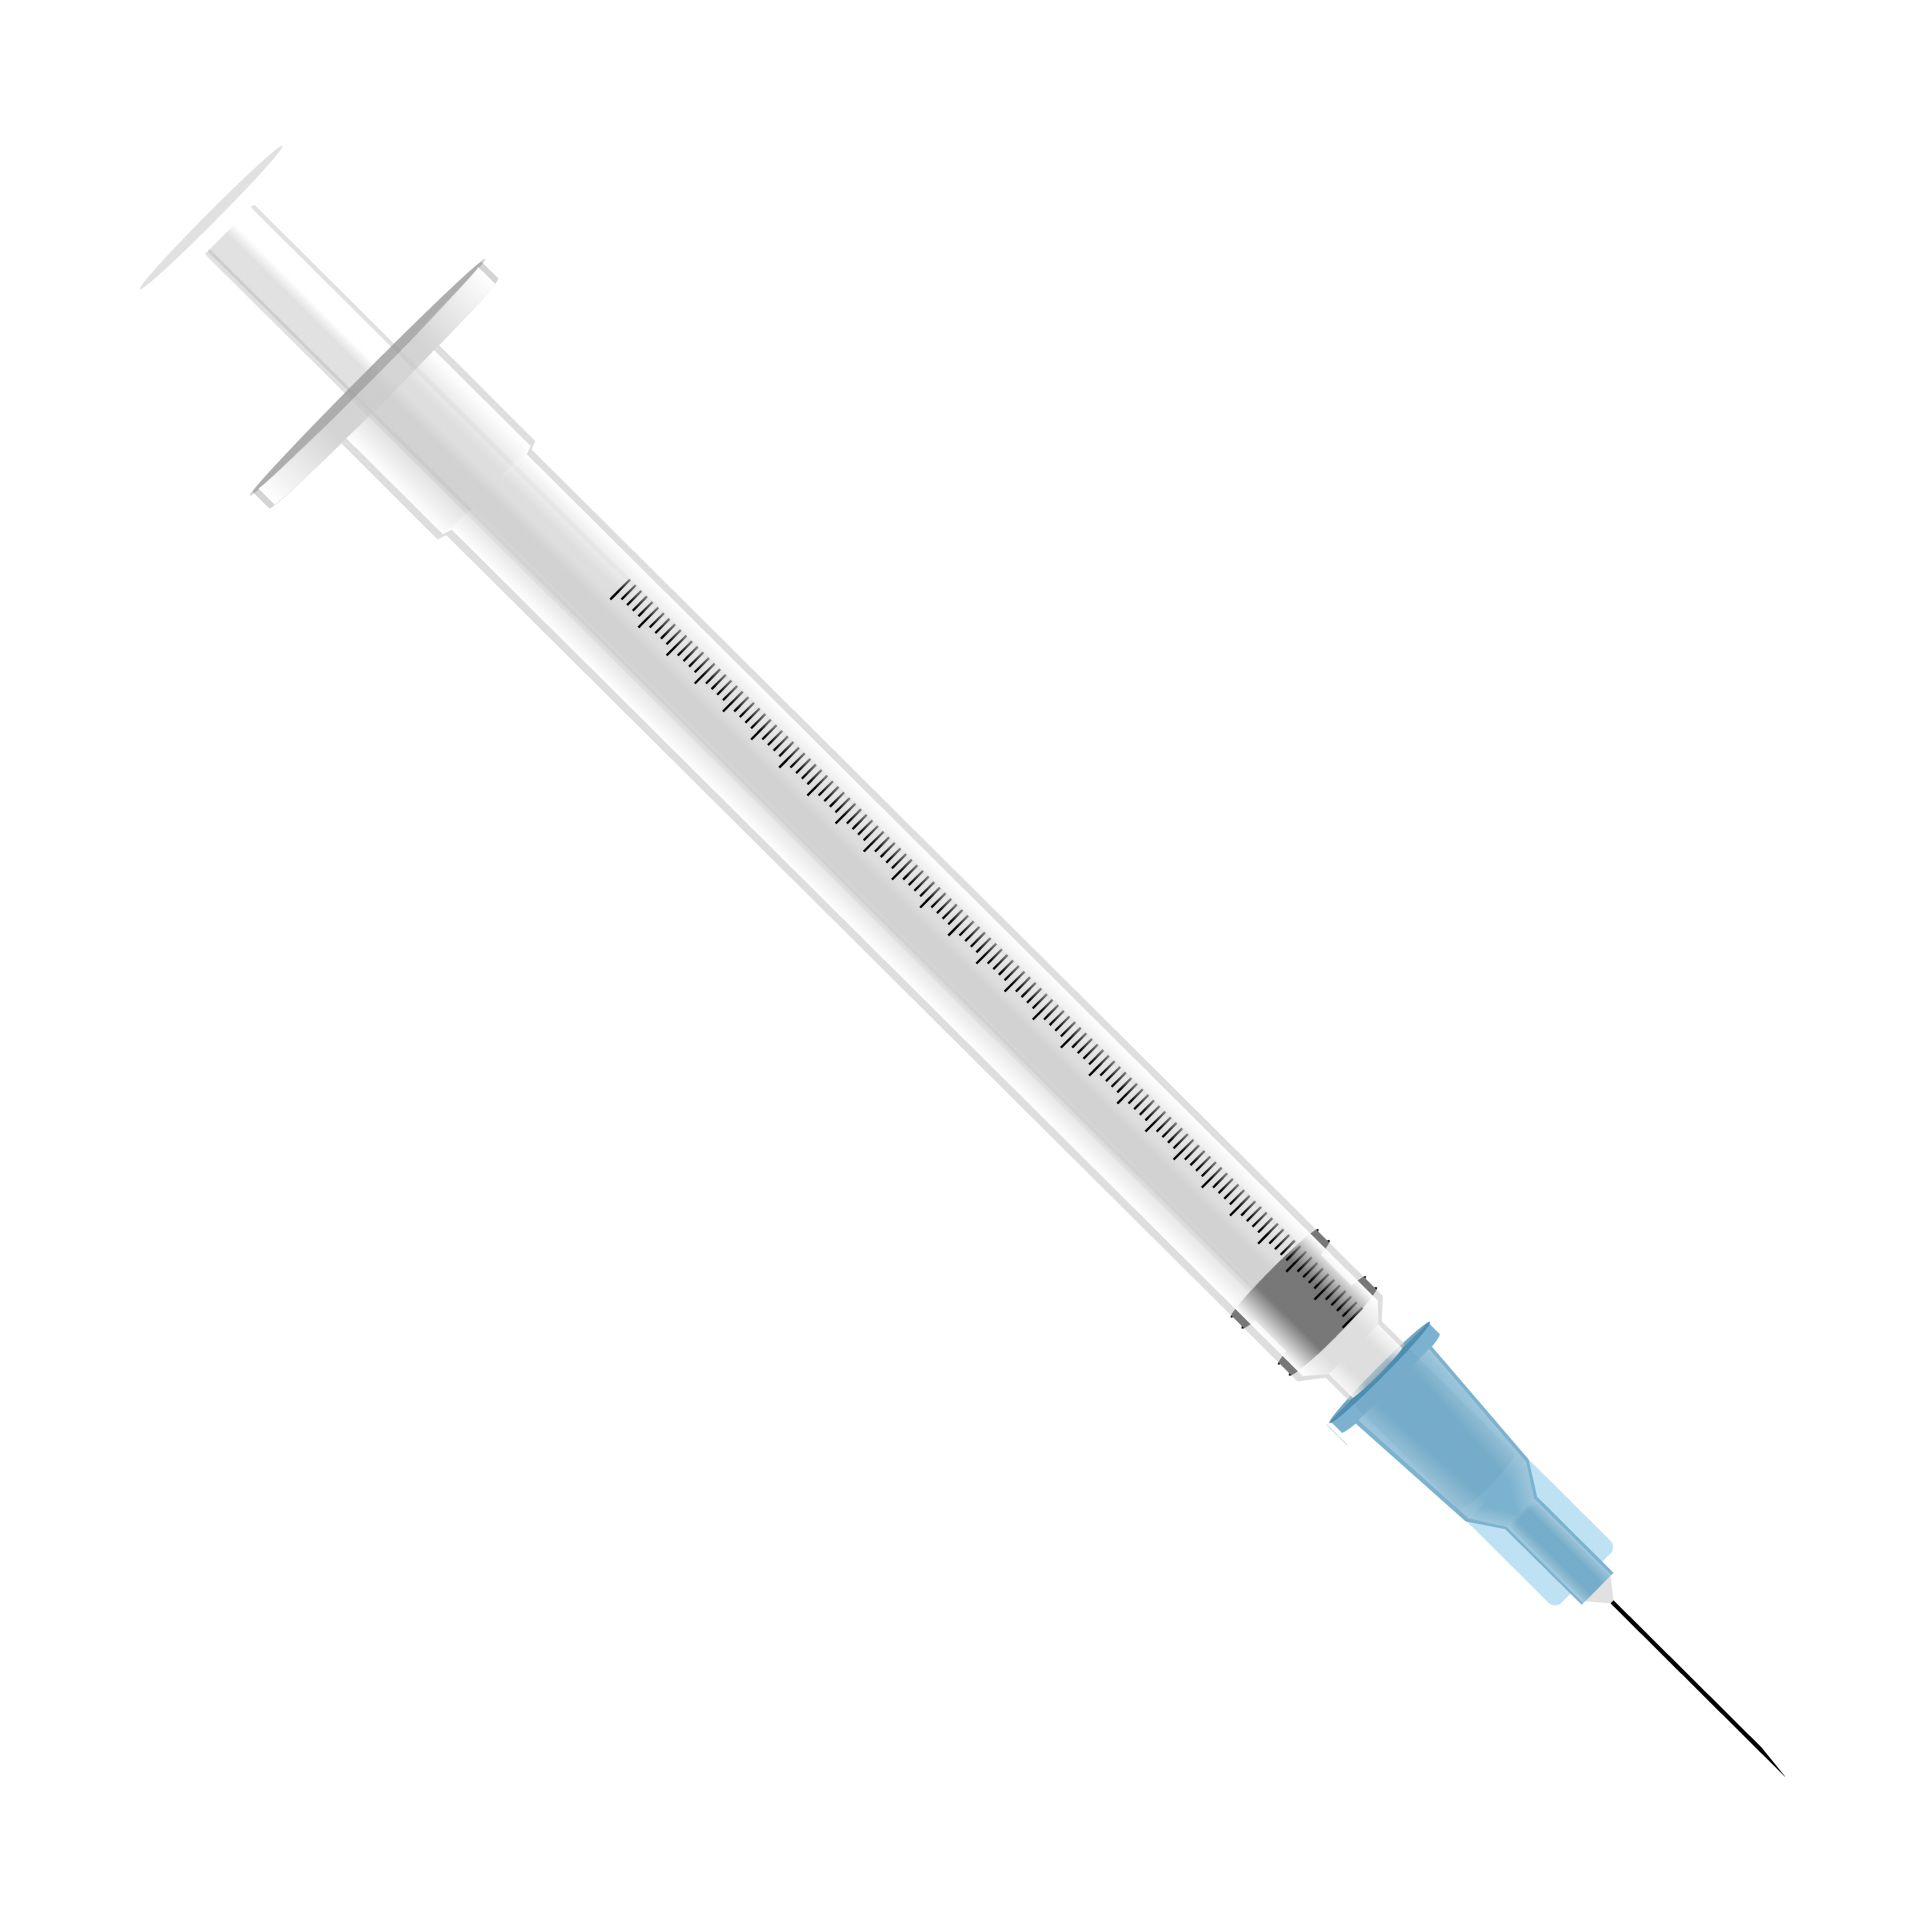 Vector illustration of a syringe with hypodermic needle for vaccination, injection clipart on transparent png background